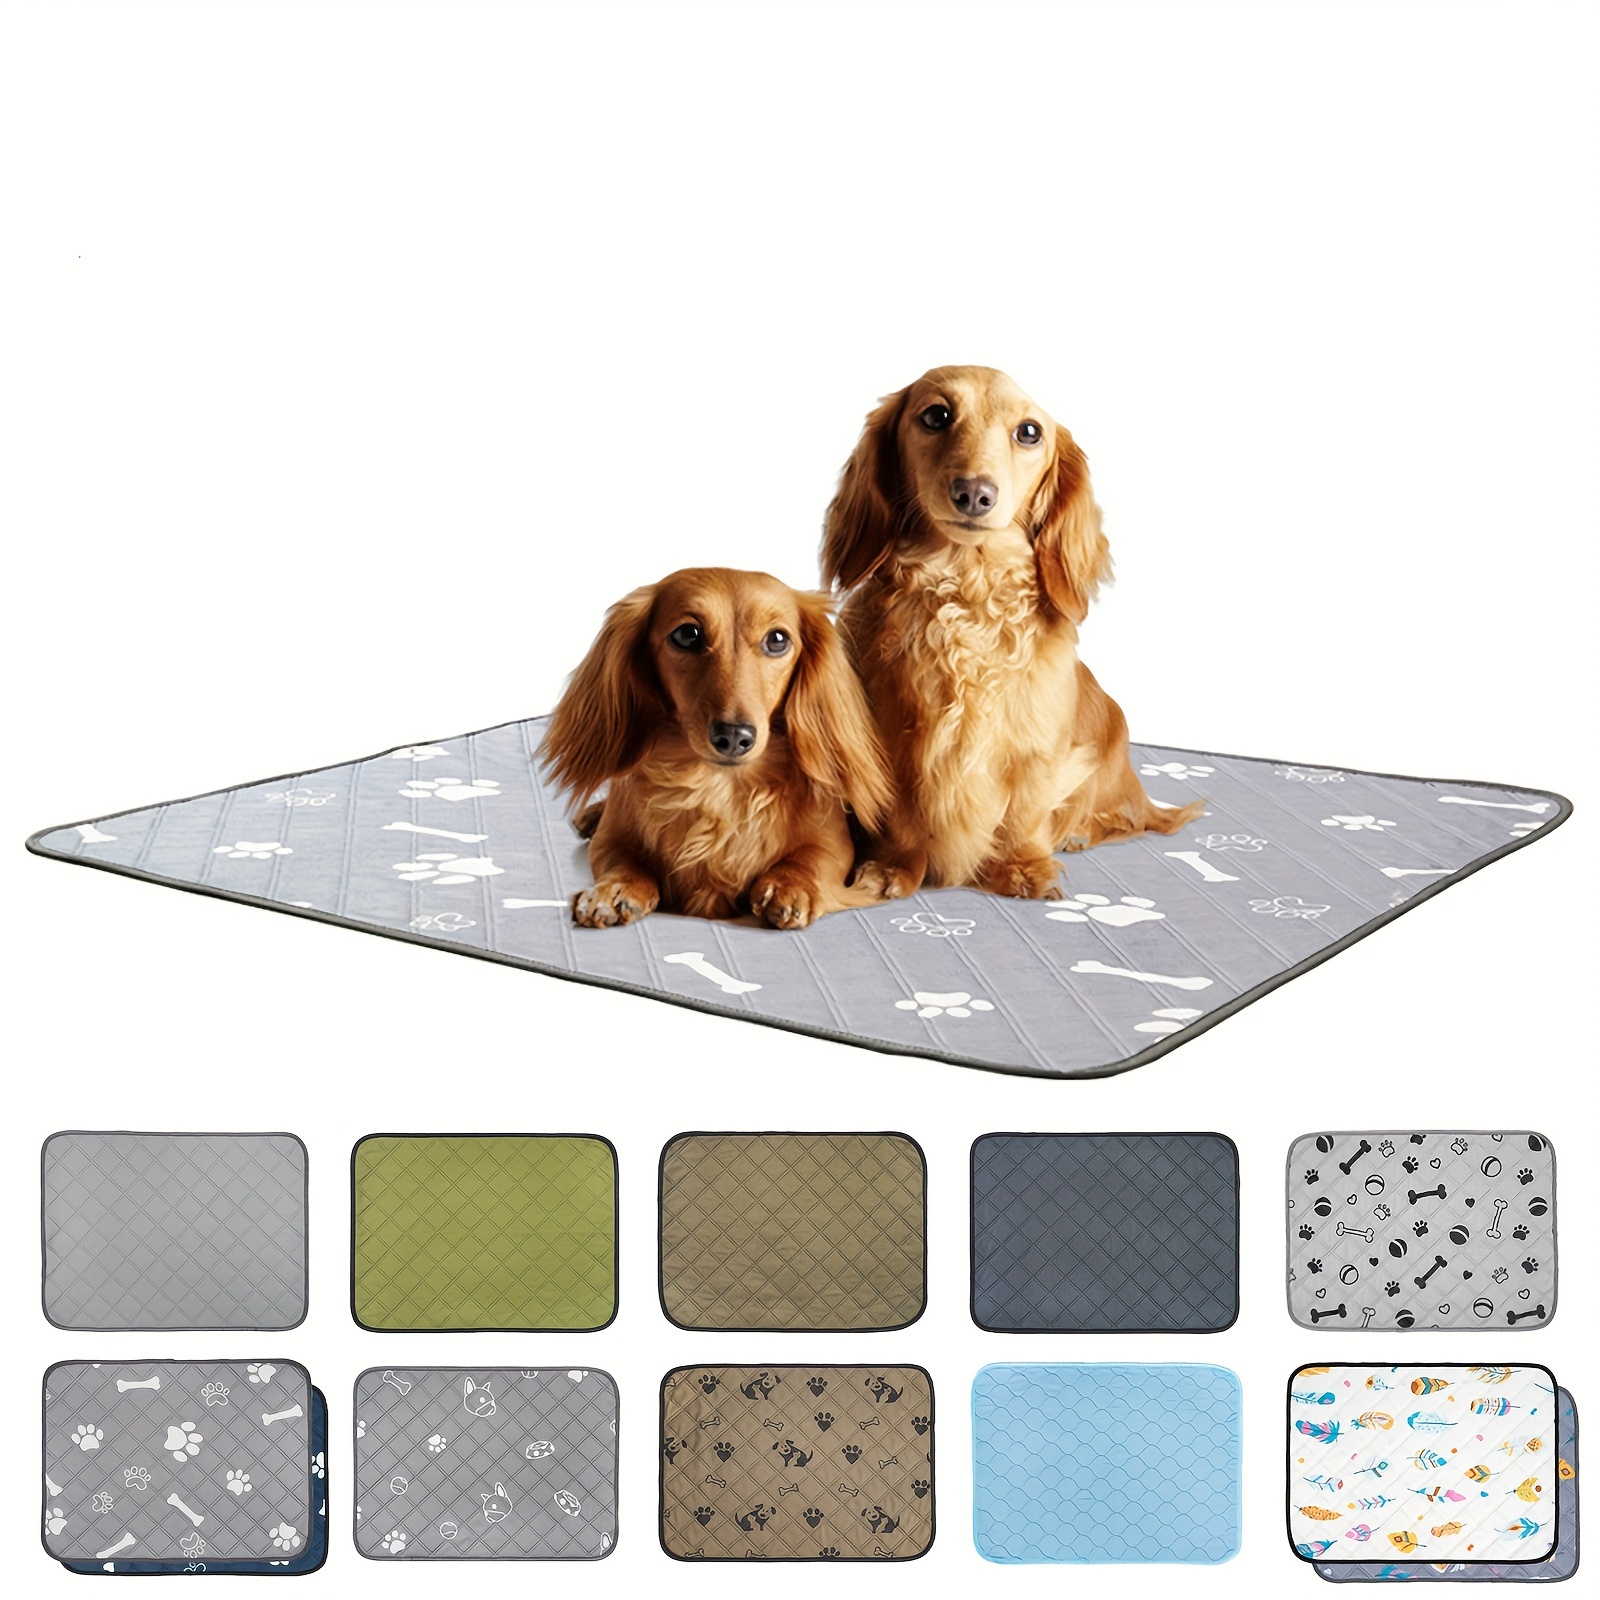 Washable Pee Pads for Dogs | Reusable Puppy Pads Pet Training Pads |  Reusable Pee Pads for Dogs | Washable Dog Training Pads, Washable Potty  Pads